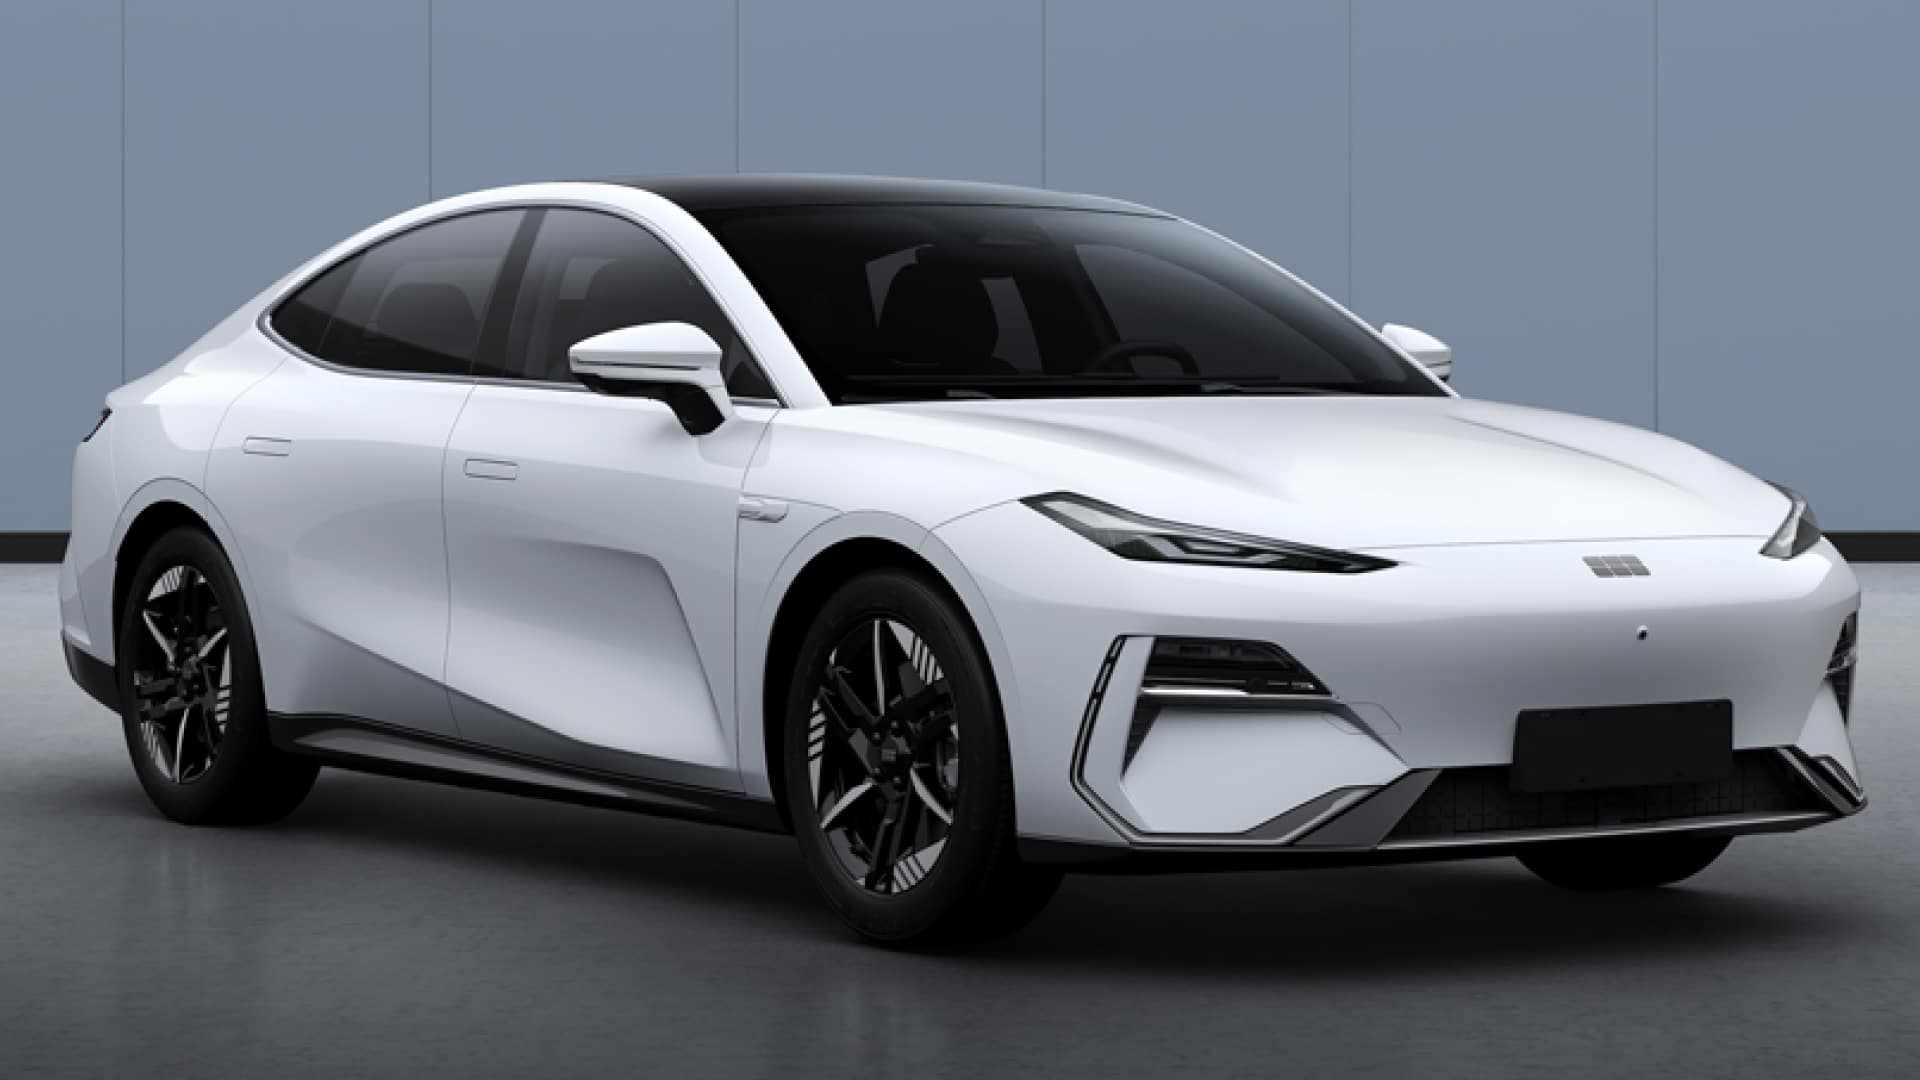 geely-galaxy-e8-is-a-large-5-meter-electric-sedan-for-china